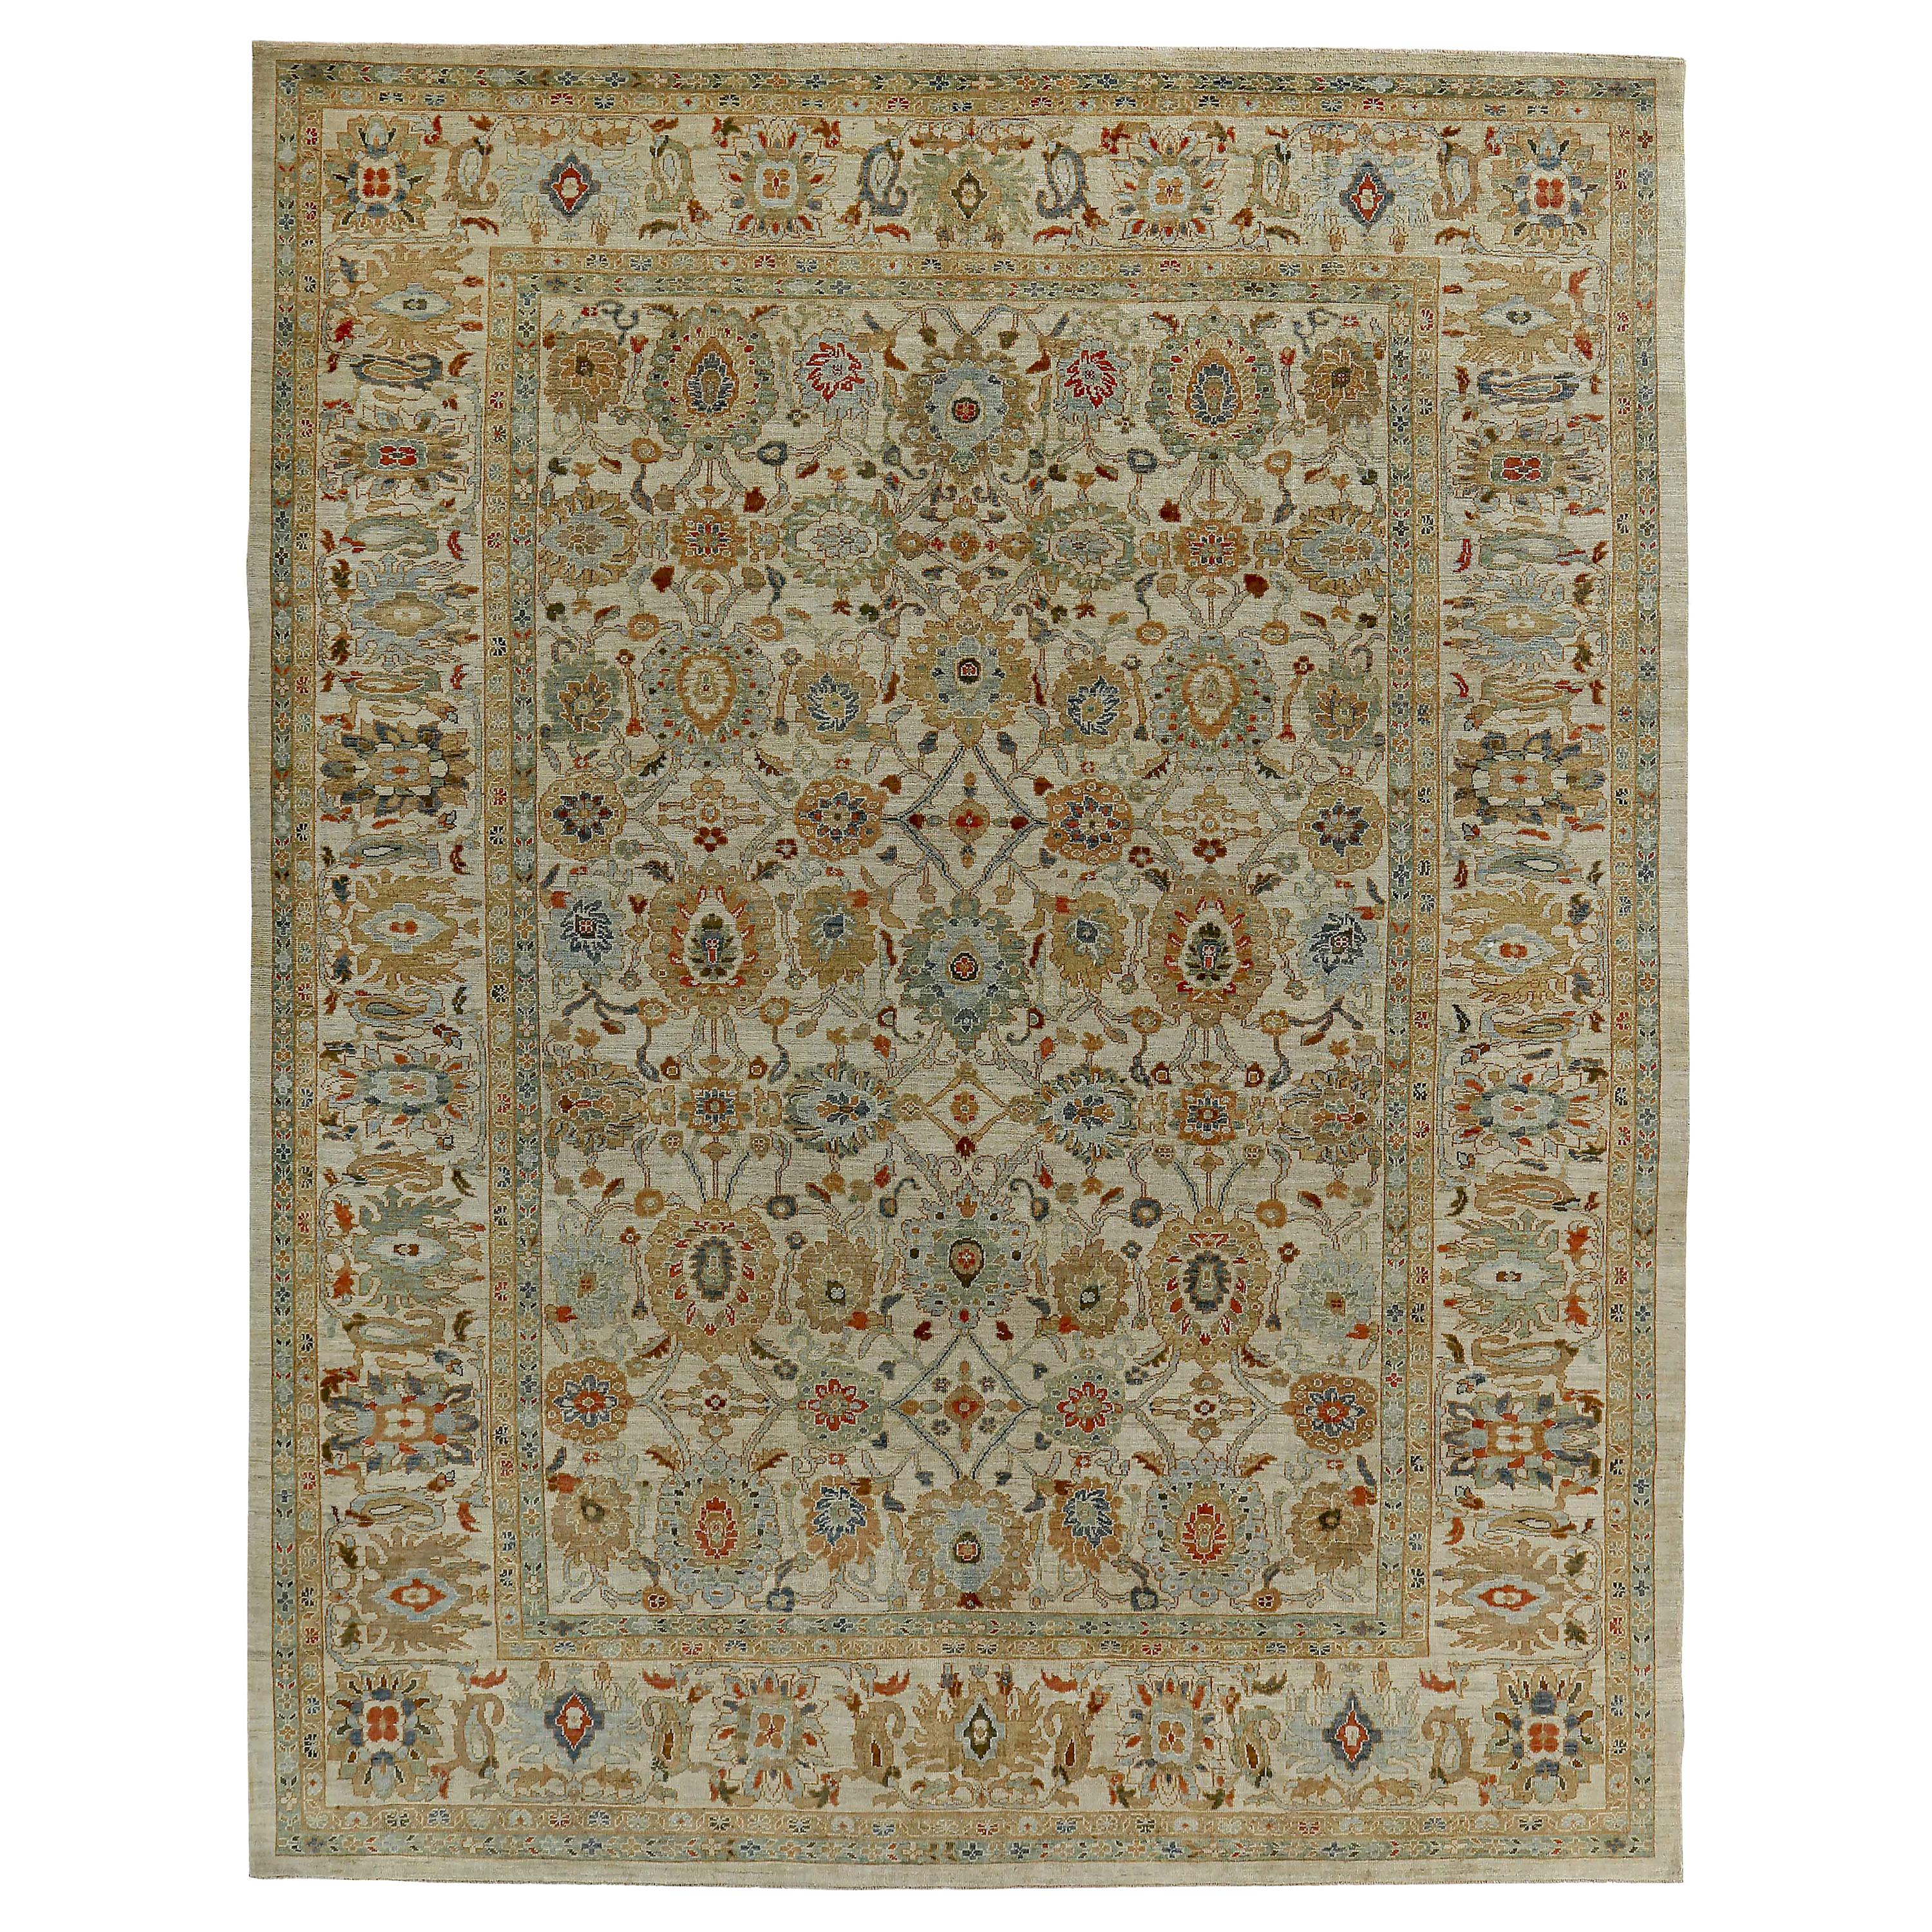 New Turkish Rug Sultanabad Design with Gray and Brown Botanical Details